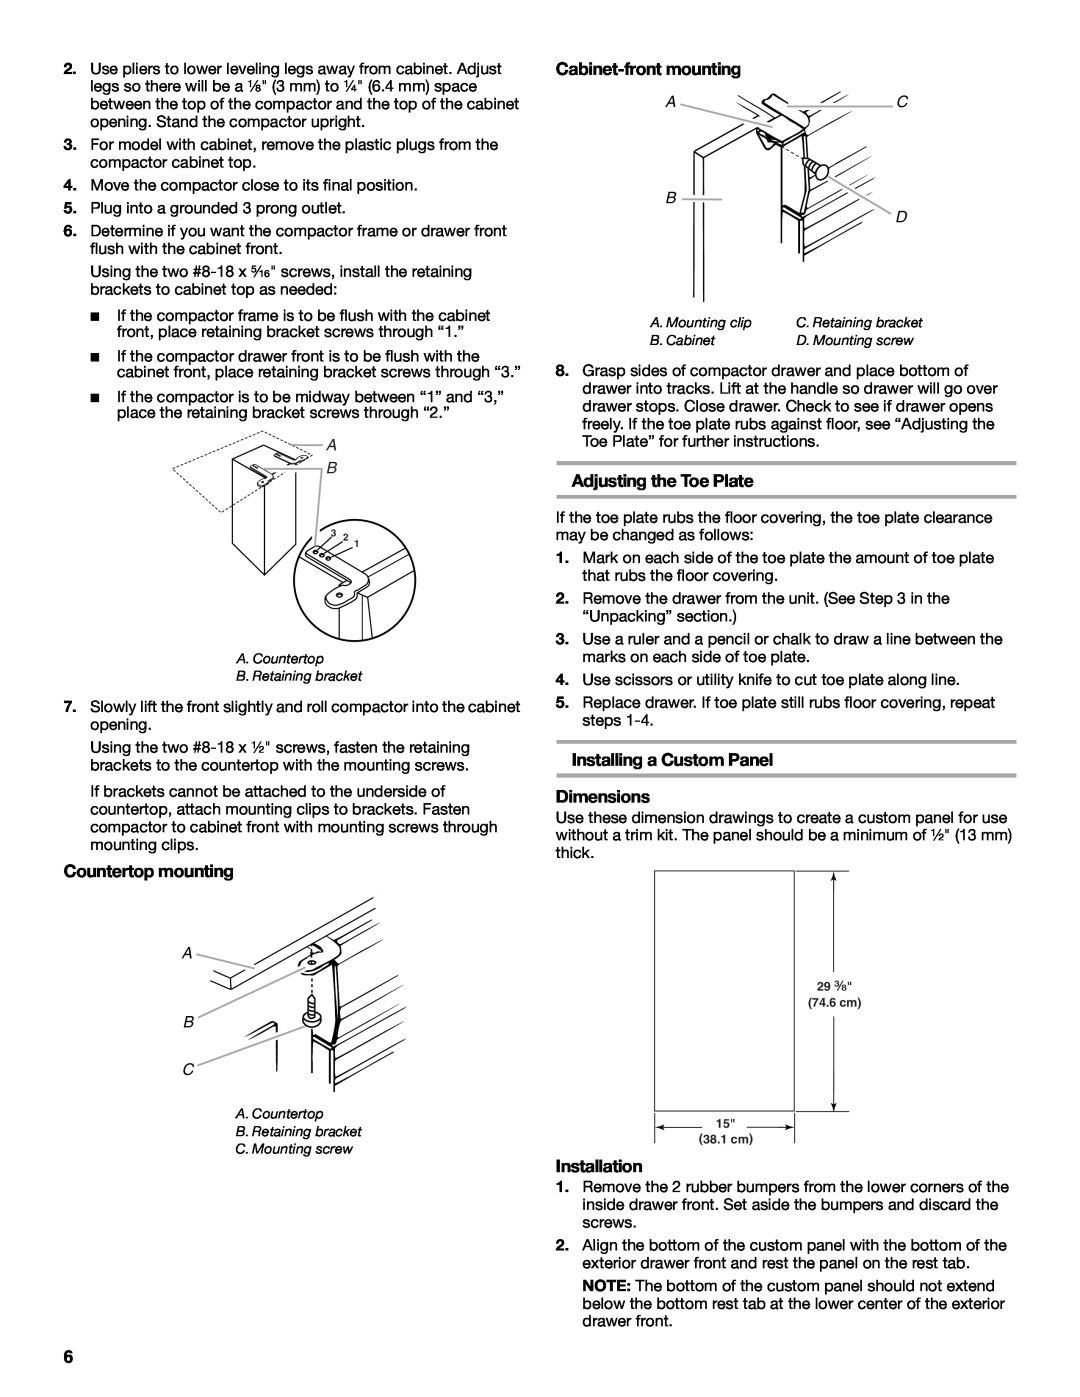 KitchenAid 9872215B manual Countertop mounting, Cabinet-frontmounting, Adjusting the Toe Plate, Installation, A C B D 